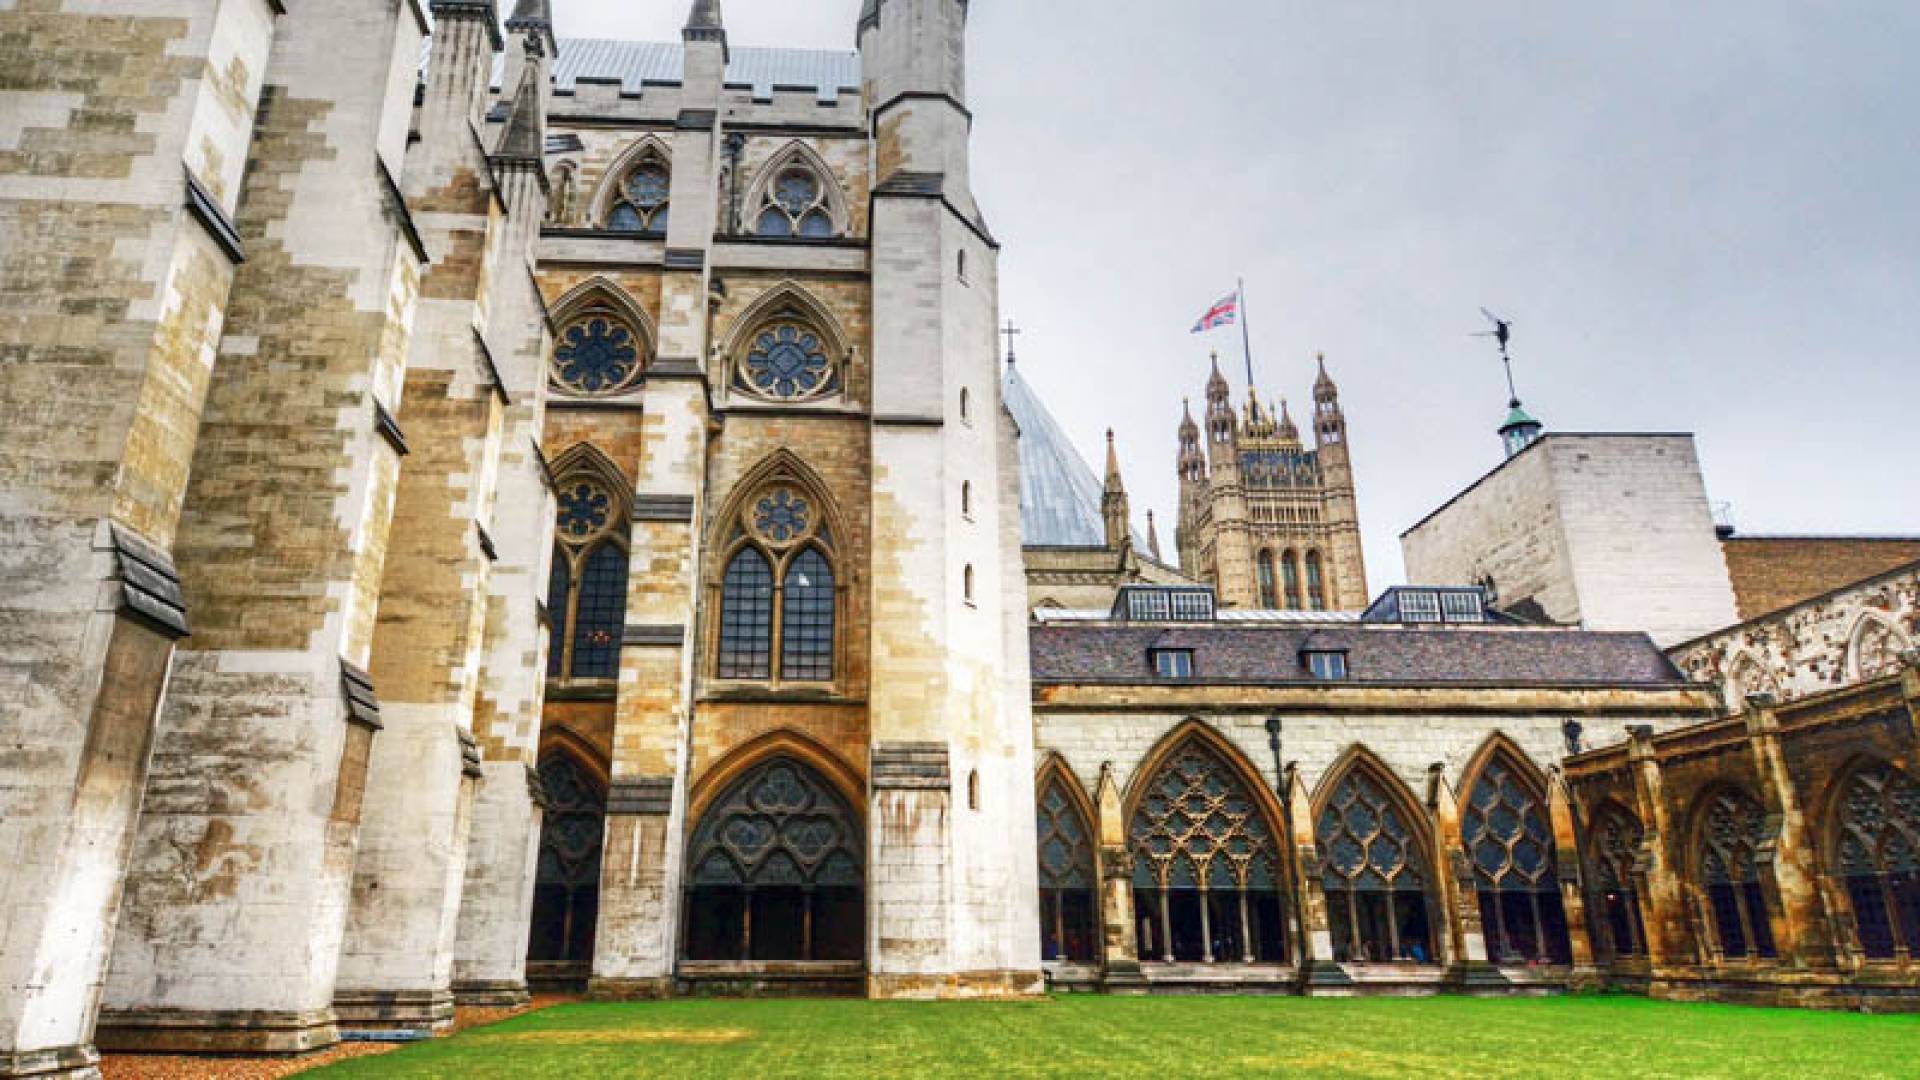 WESTMINSTER ABBEY, Kloster